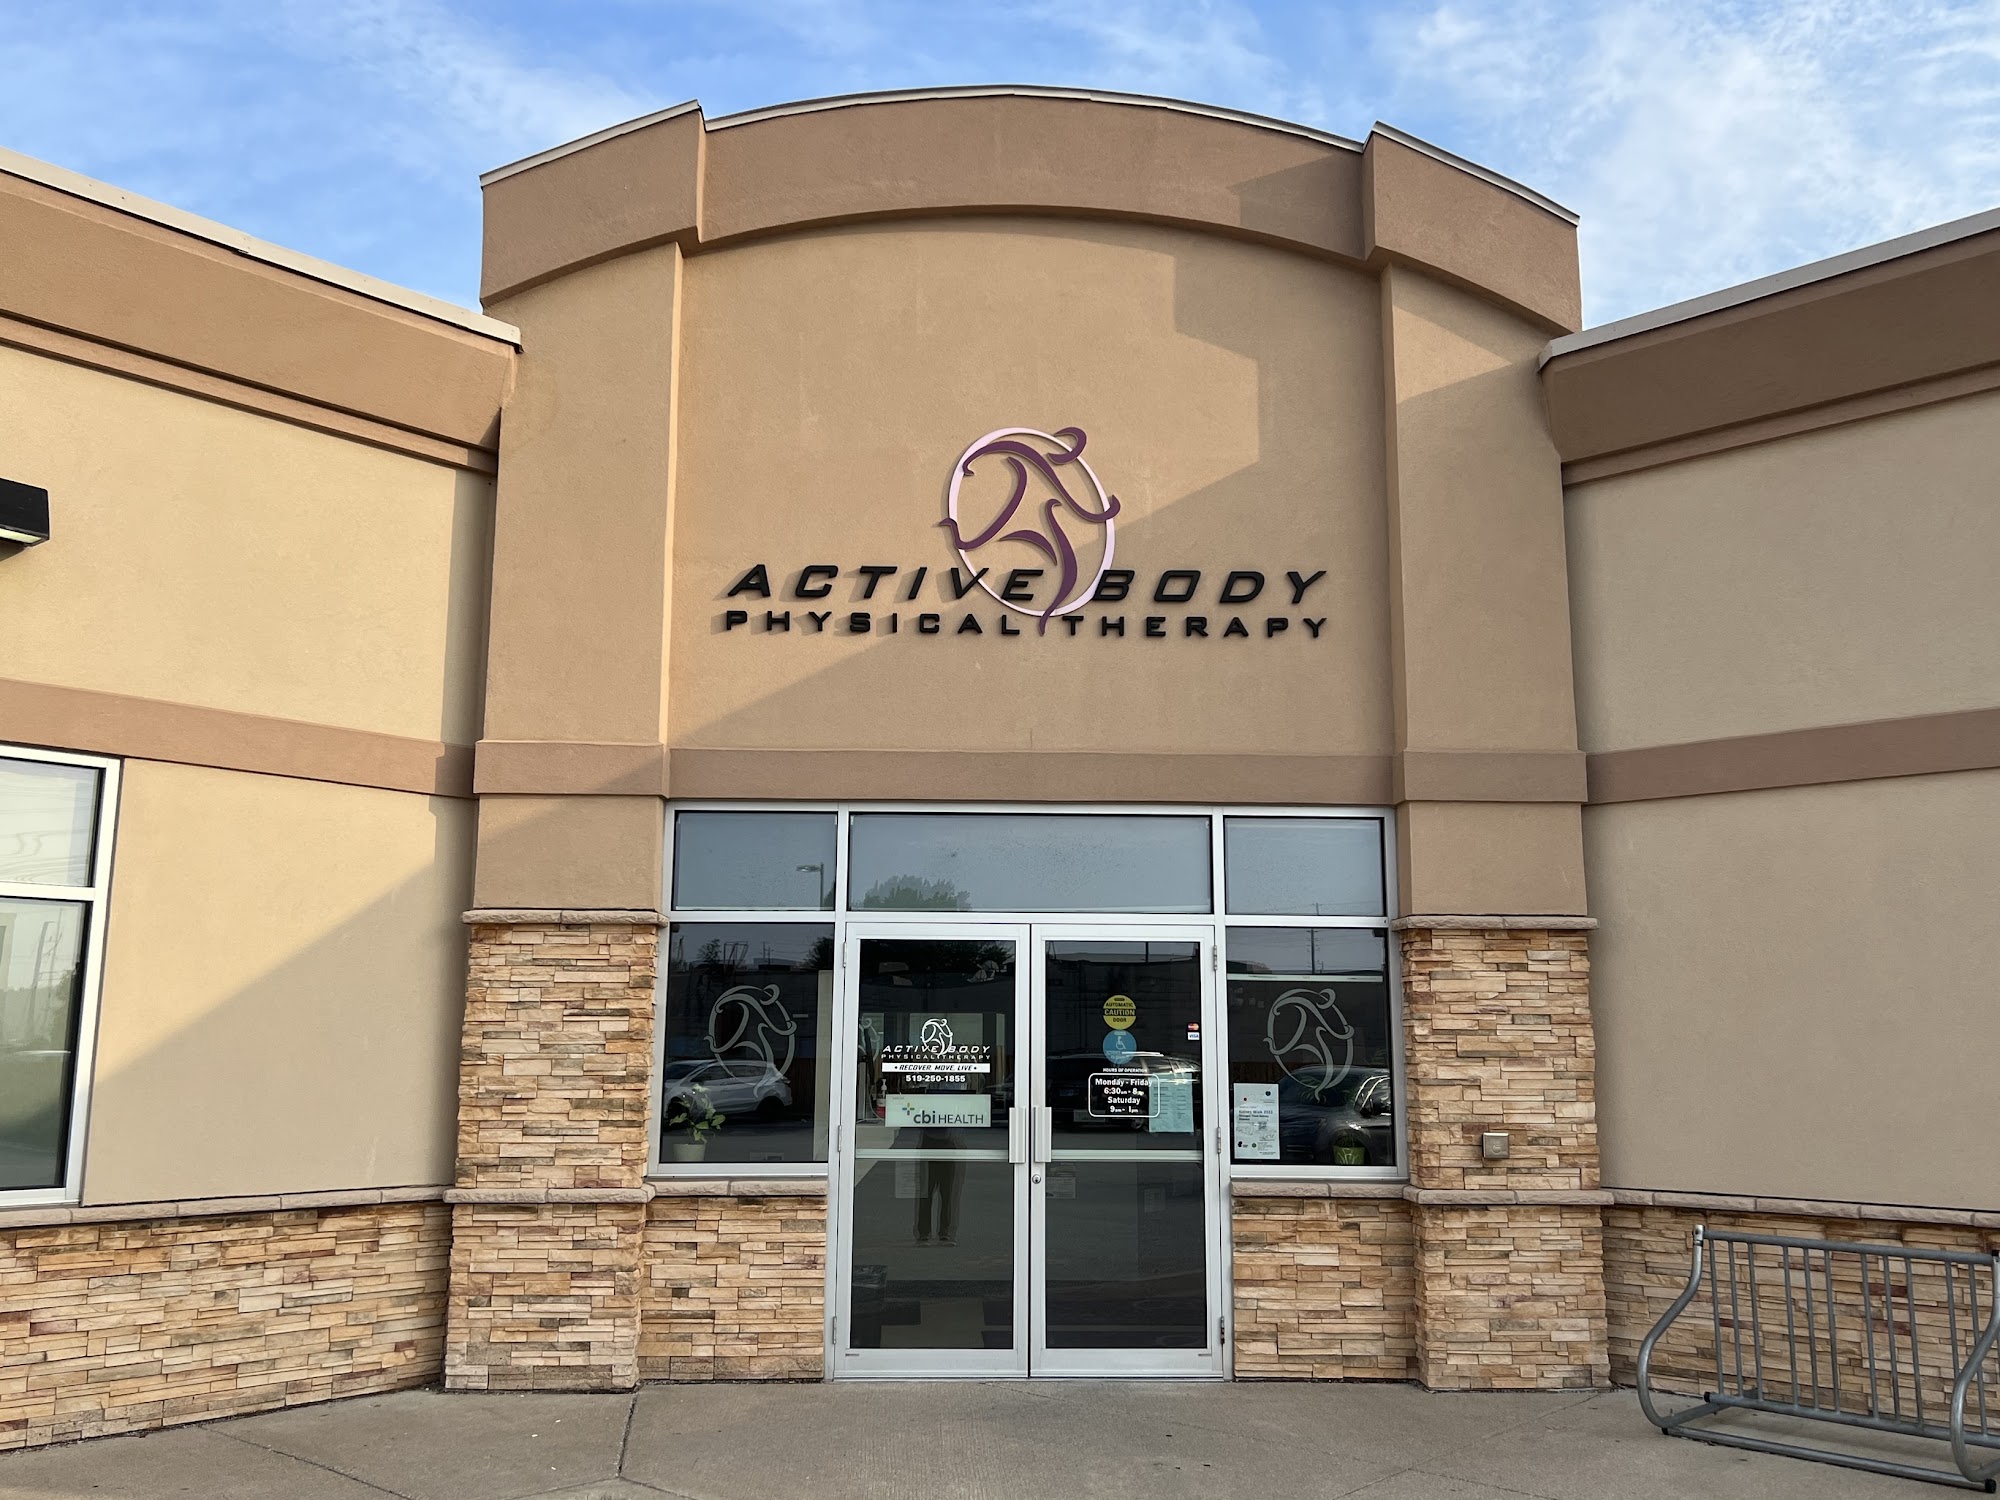 Active Body Physical Therapy 1765 Sprucewood Ave, Windsor Ontario N9J 1X7